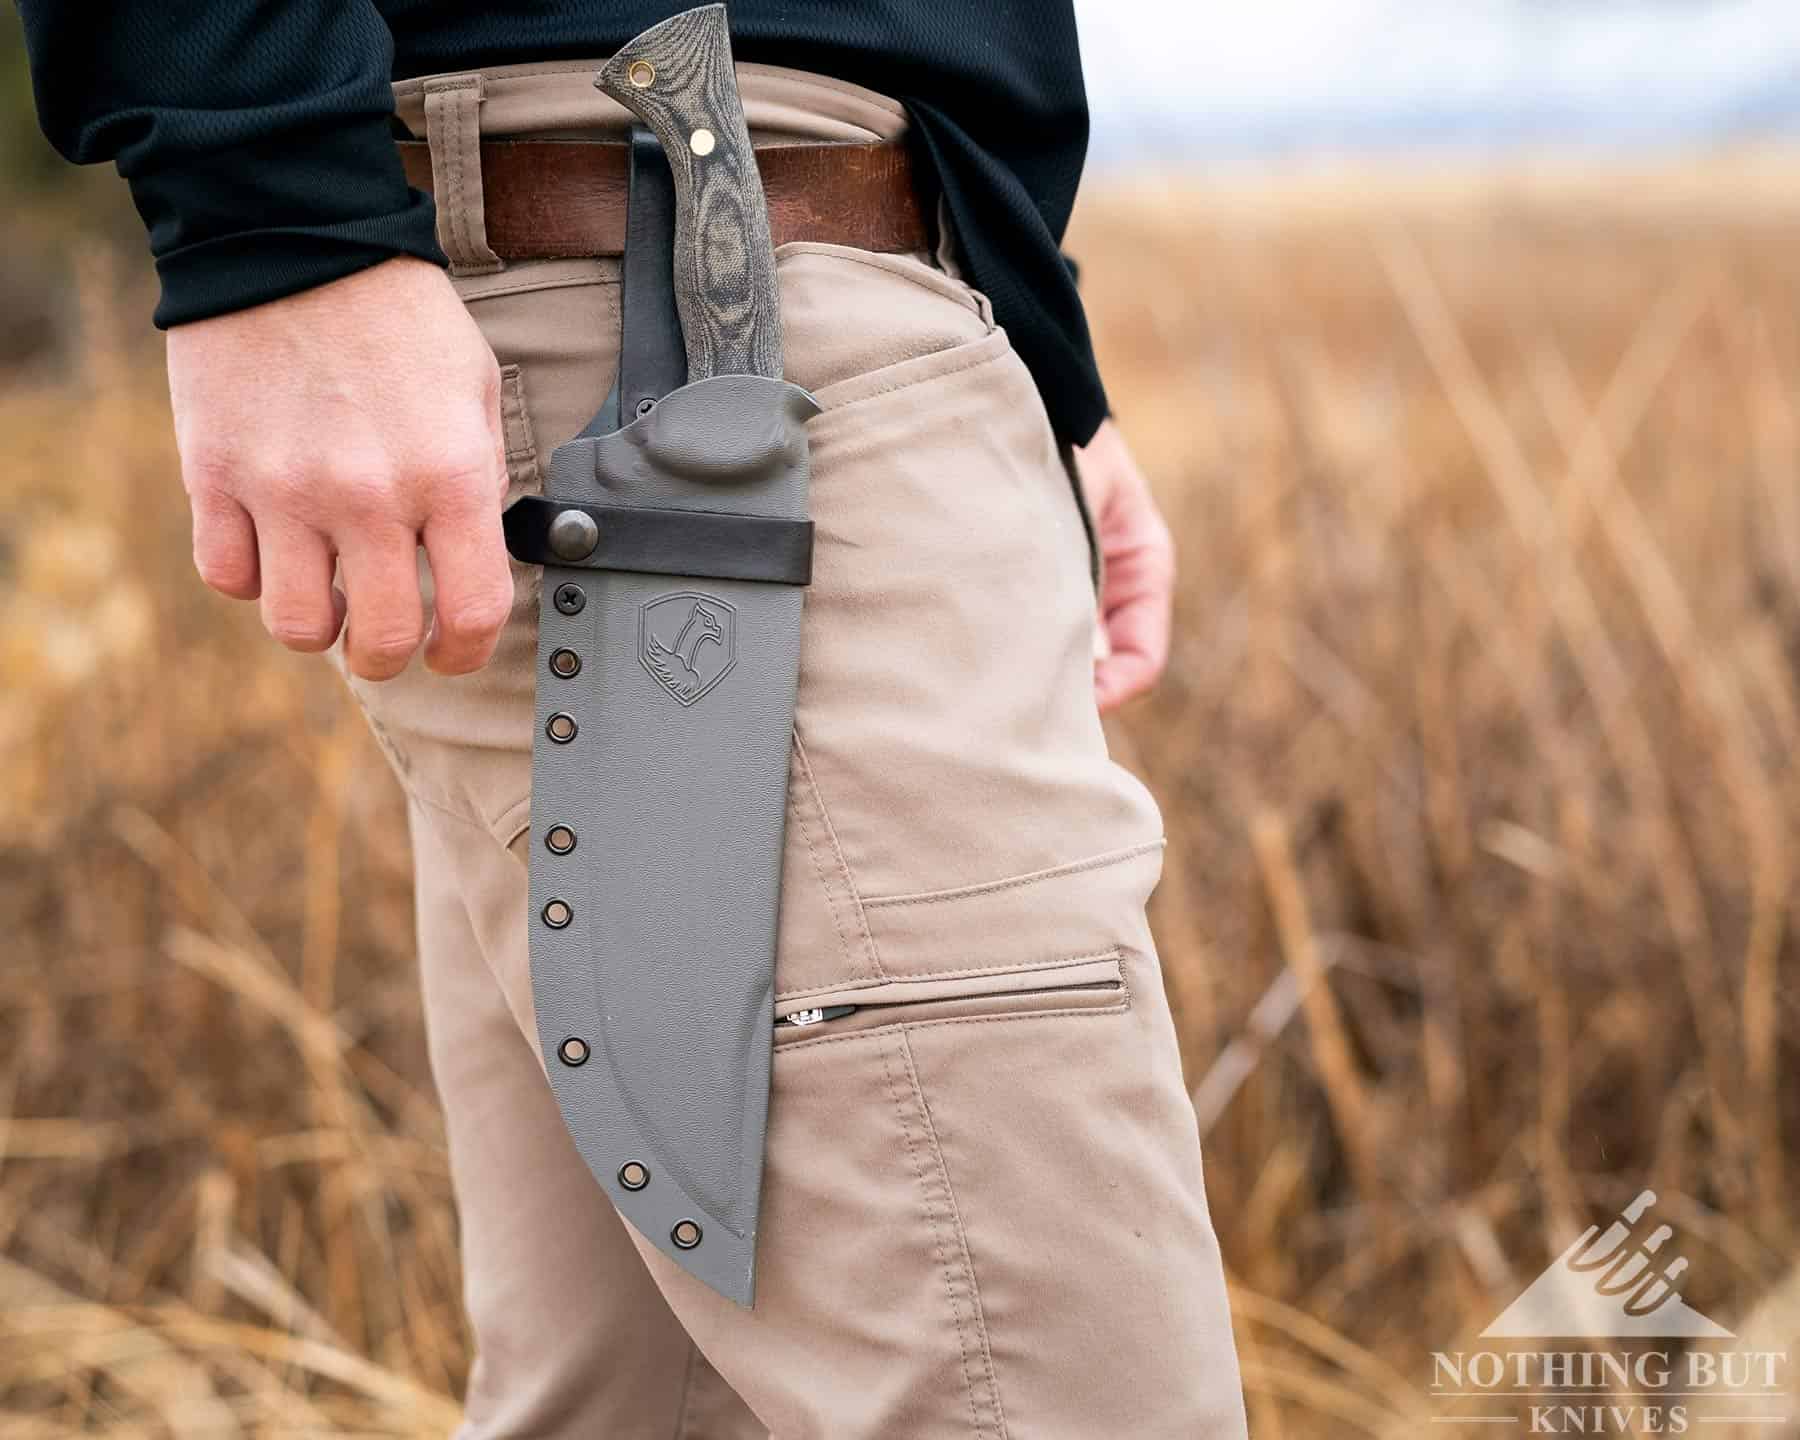 The sheath of the Condor Plan A Bowie is really well designed. It is shown here on a person's waist, so the viewer can see how it rides on the hip.